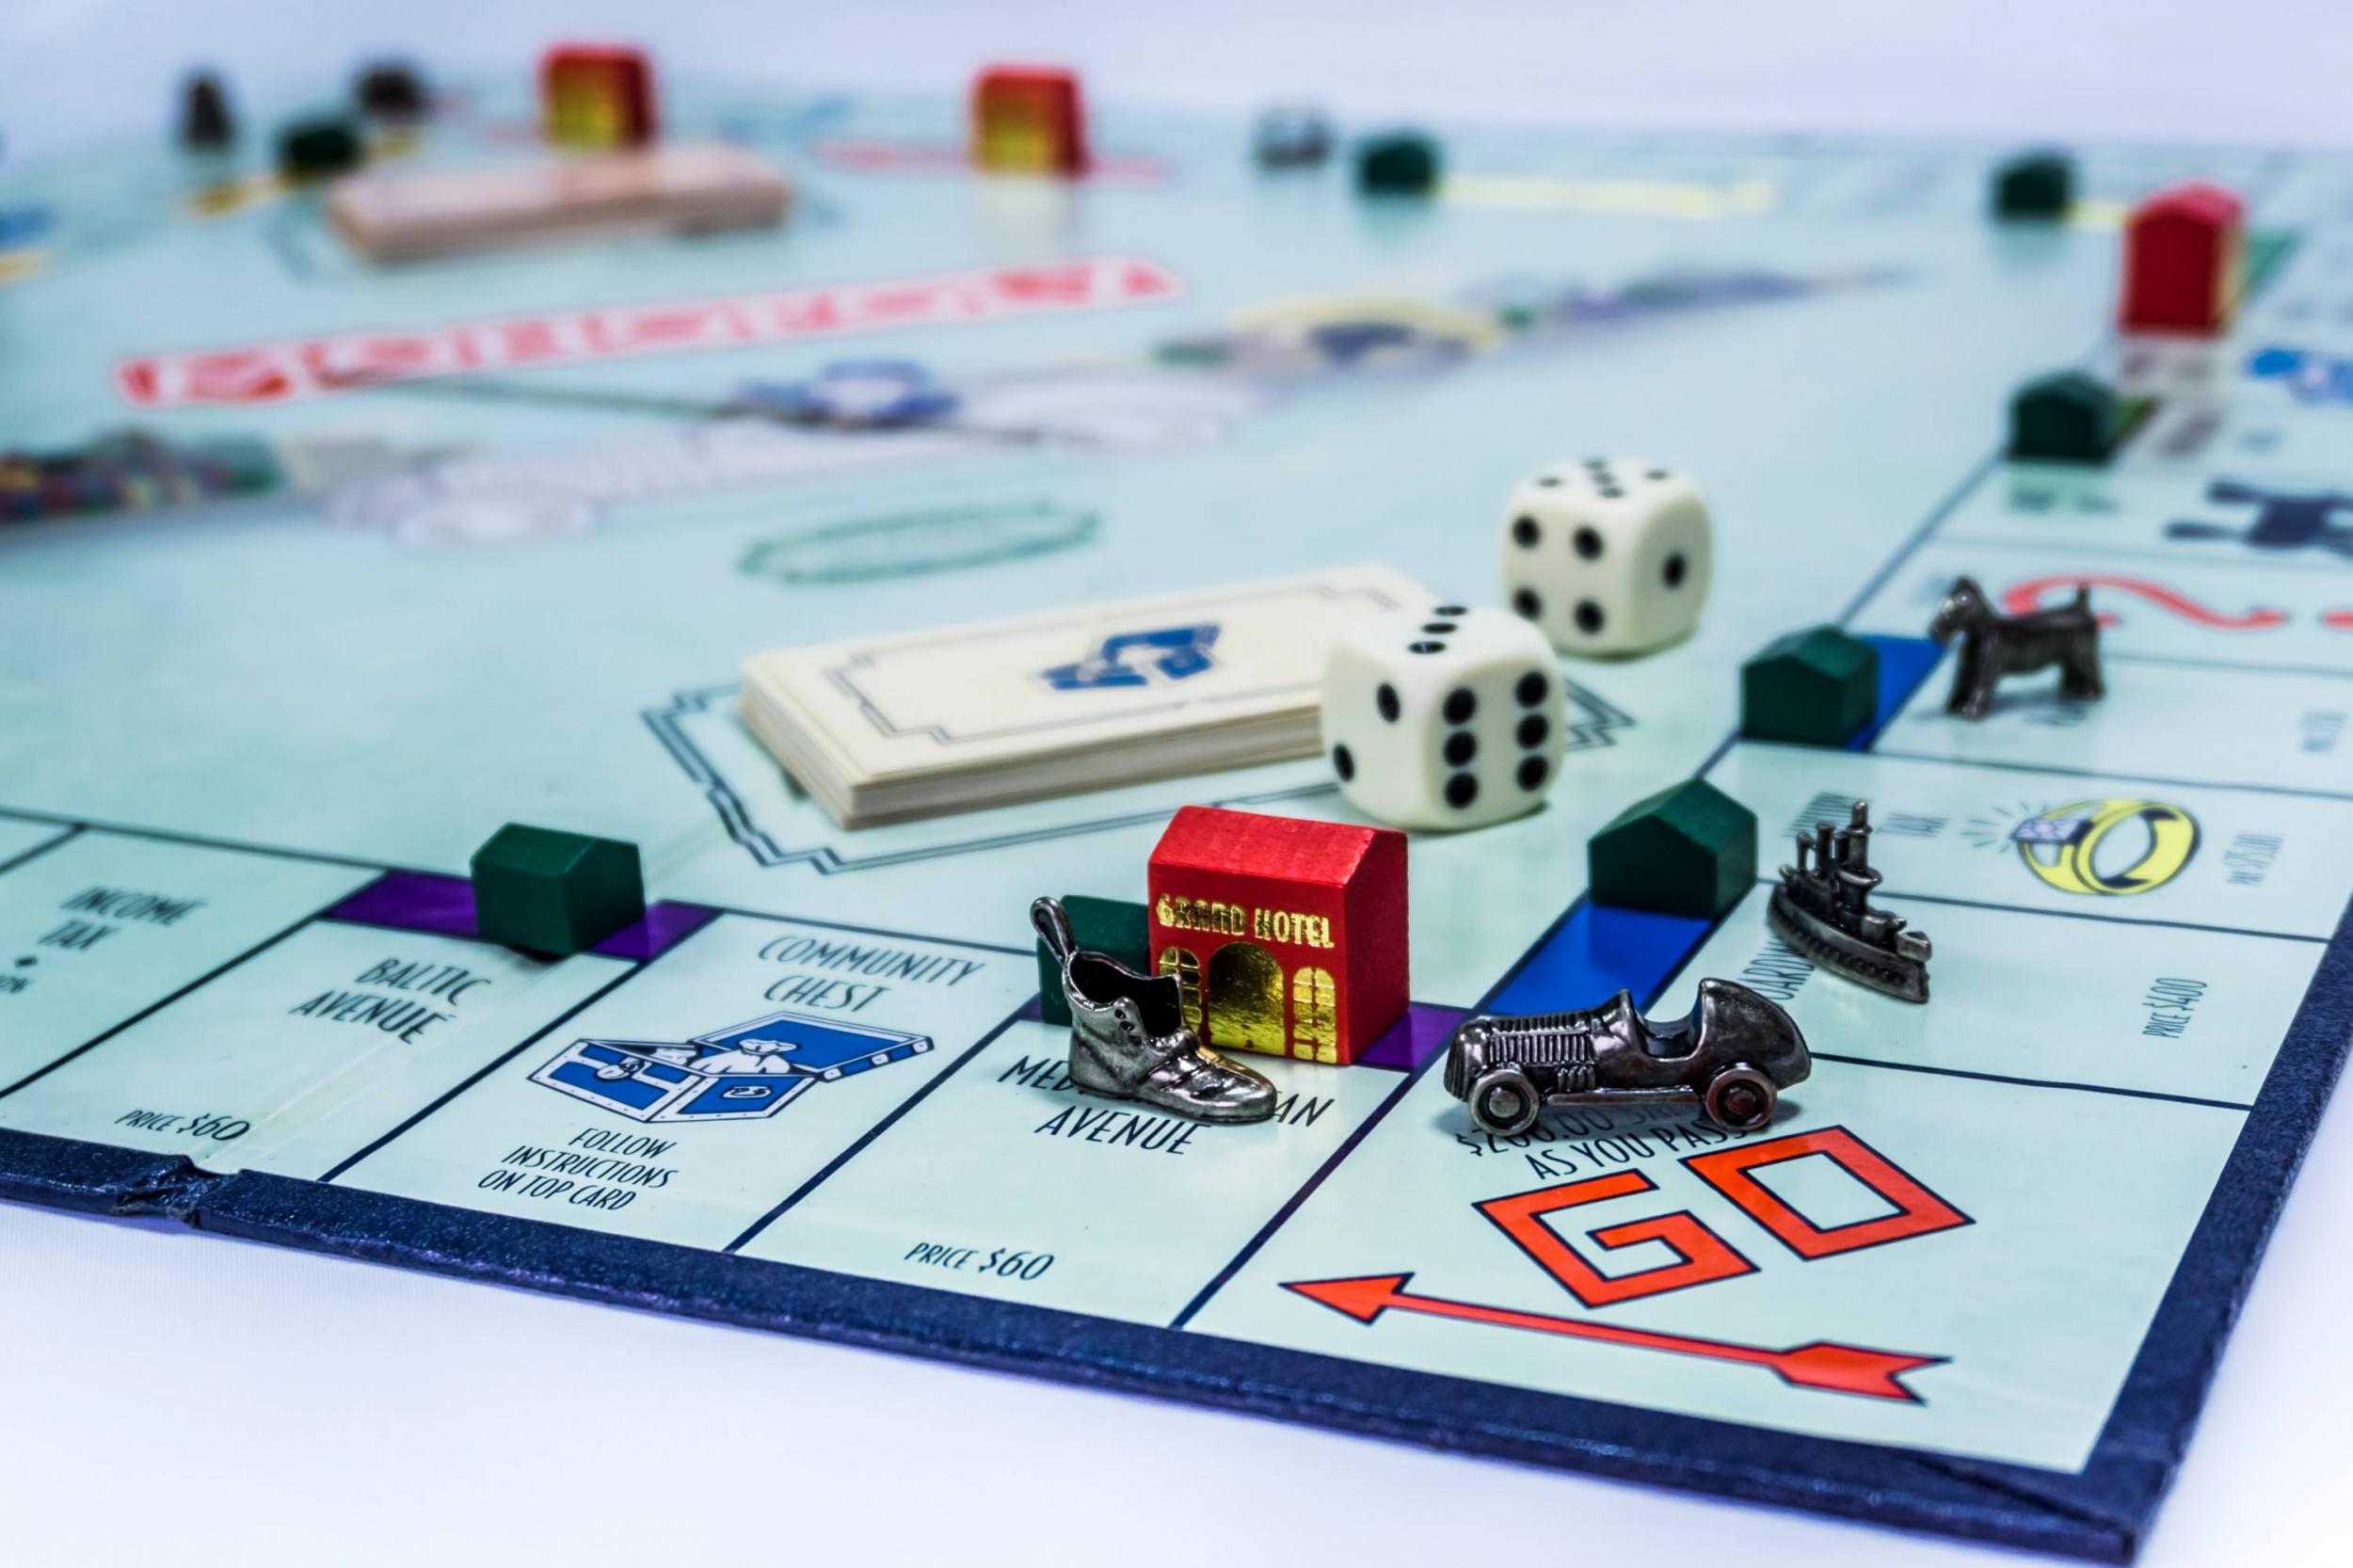 Unlike other online games, you’ll have to pay to play Monopoly